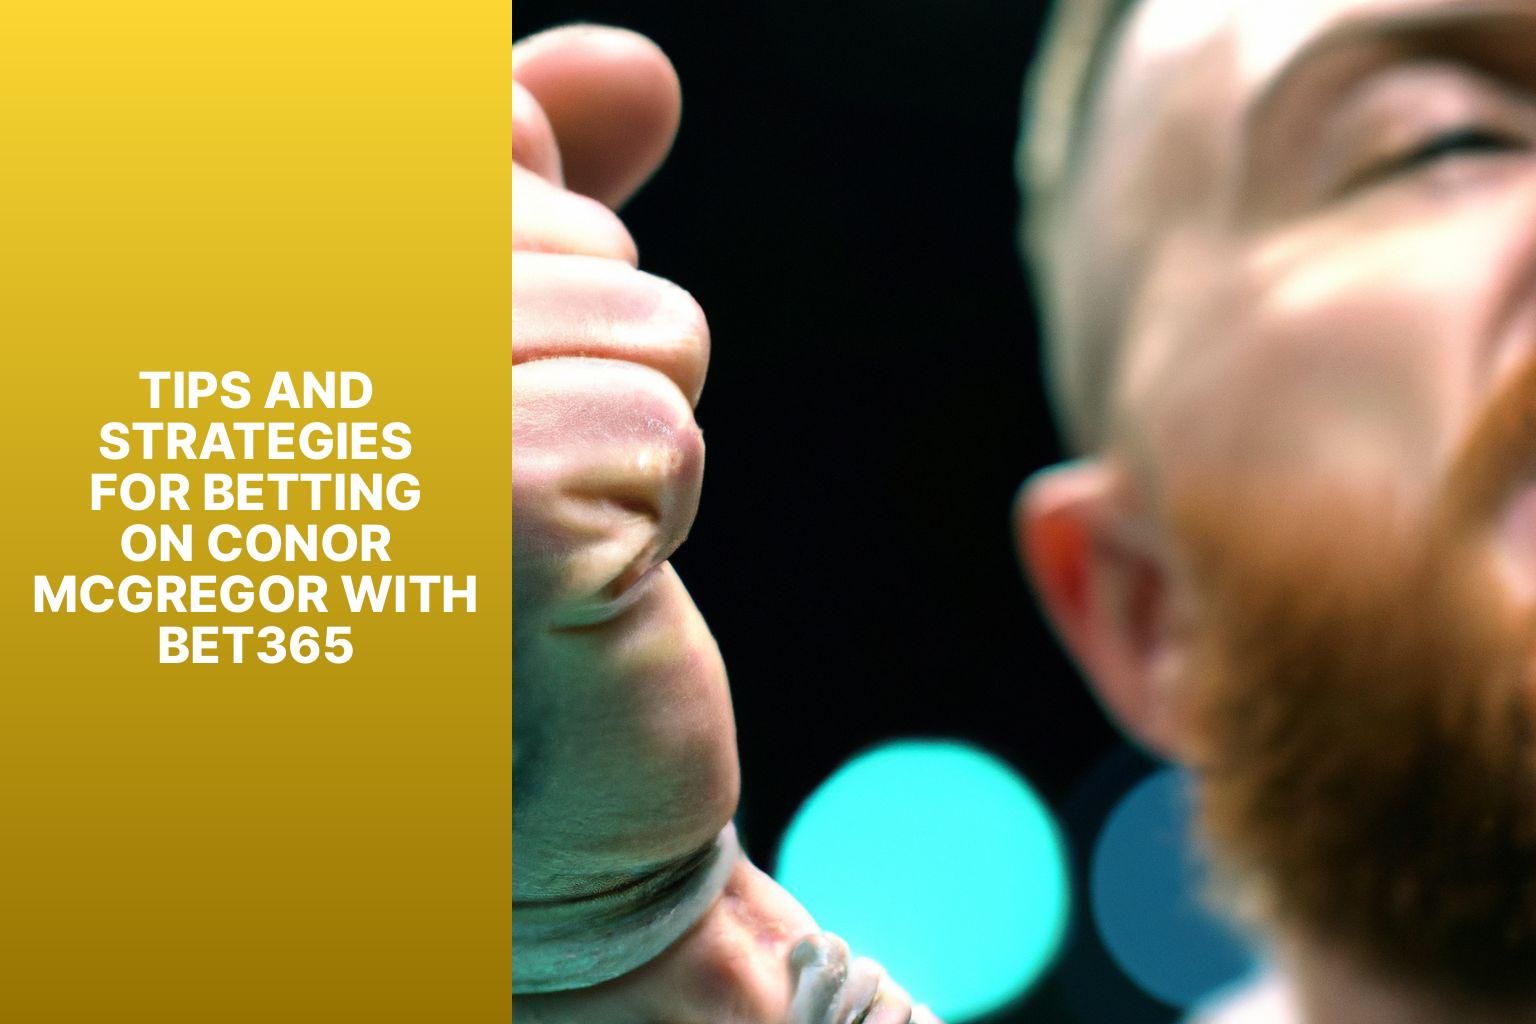 Tips and Strategies for Betting on Conor McGregor with Bet365 - McGregor Odds Bet365: Betting on Conor McGregor with Bet365 